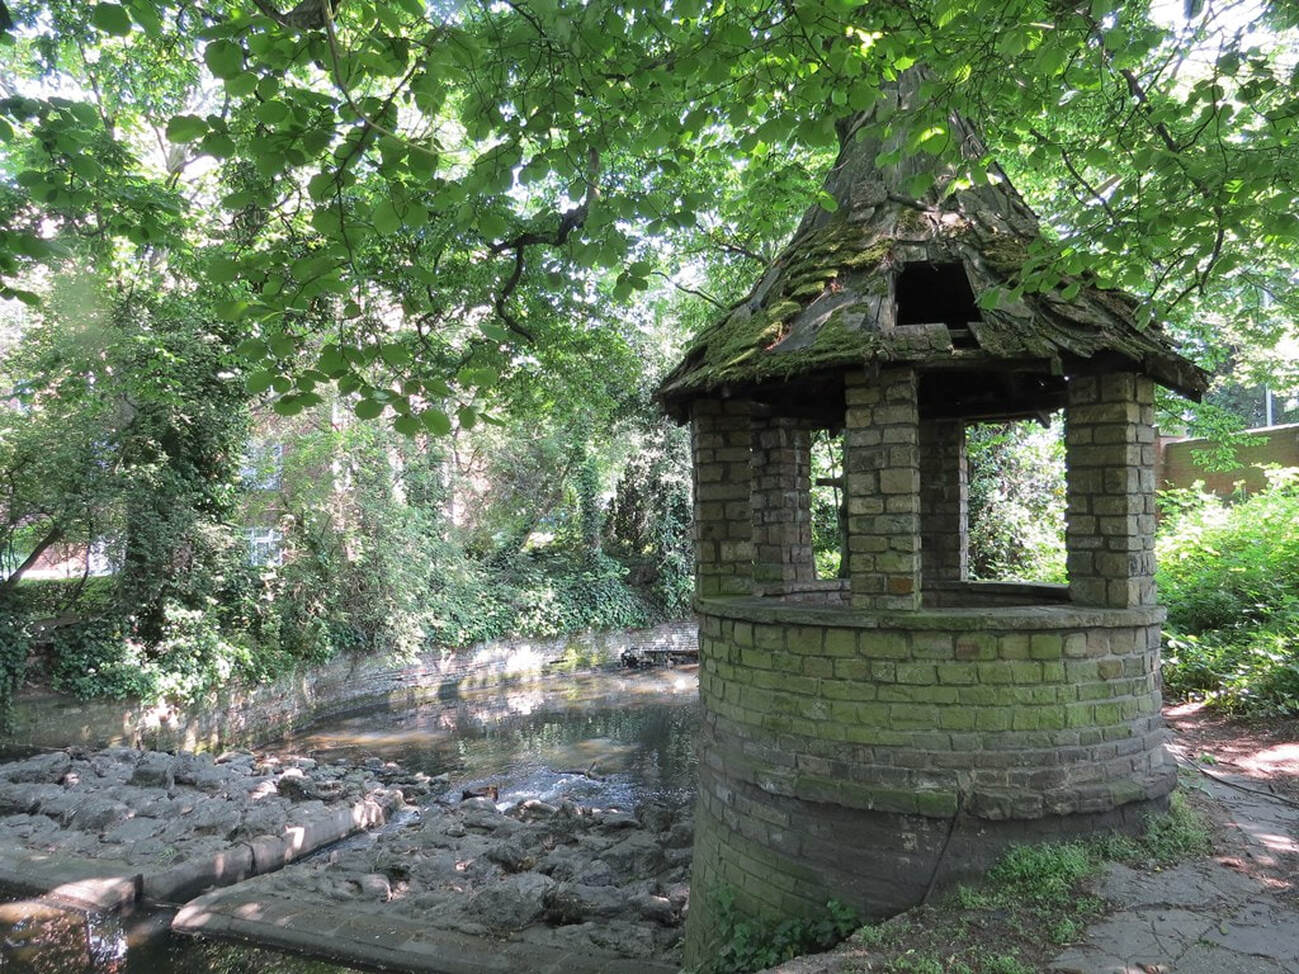 Picture of derelict round structures of Brent Bridge Hotel in Hendon beside the River Brent